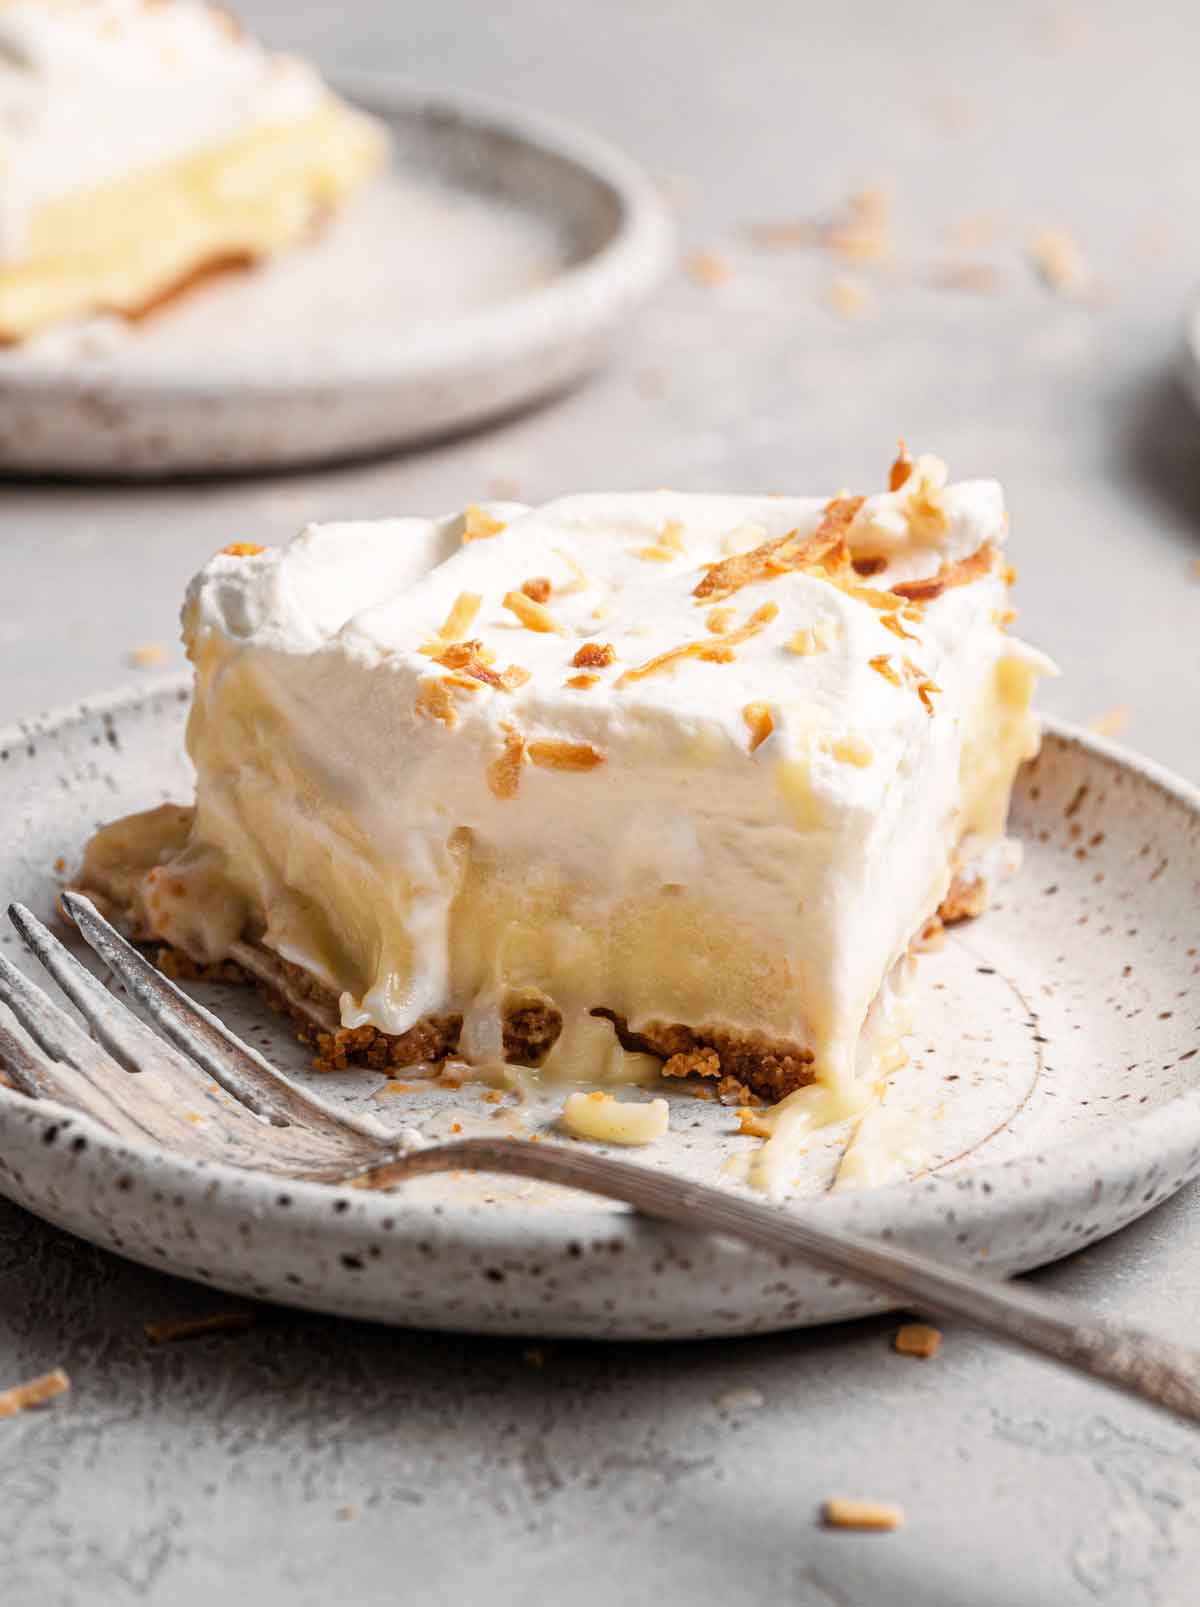 Slice of coconut cream pie on a speckled plate with a fork.